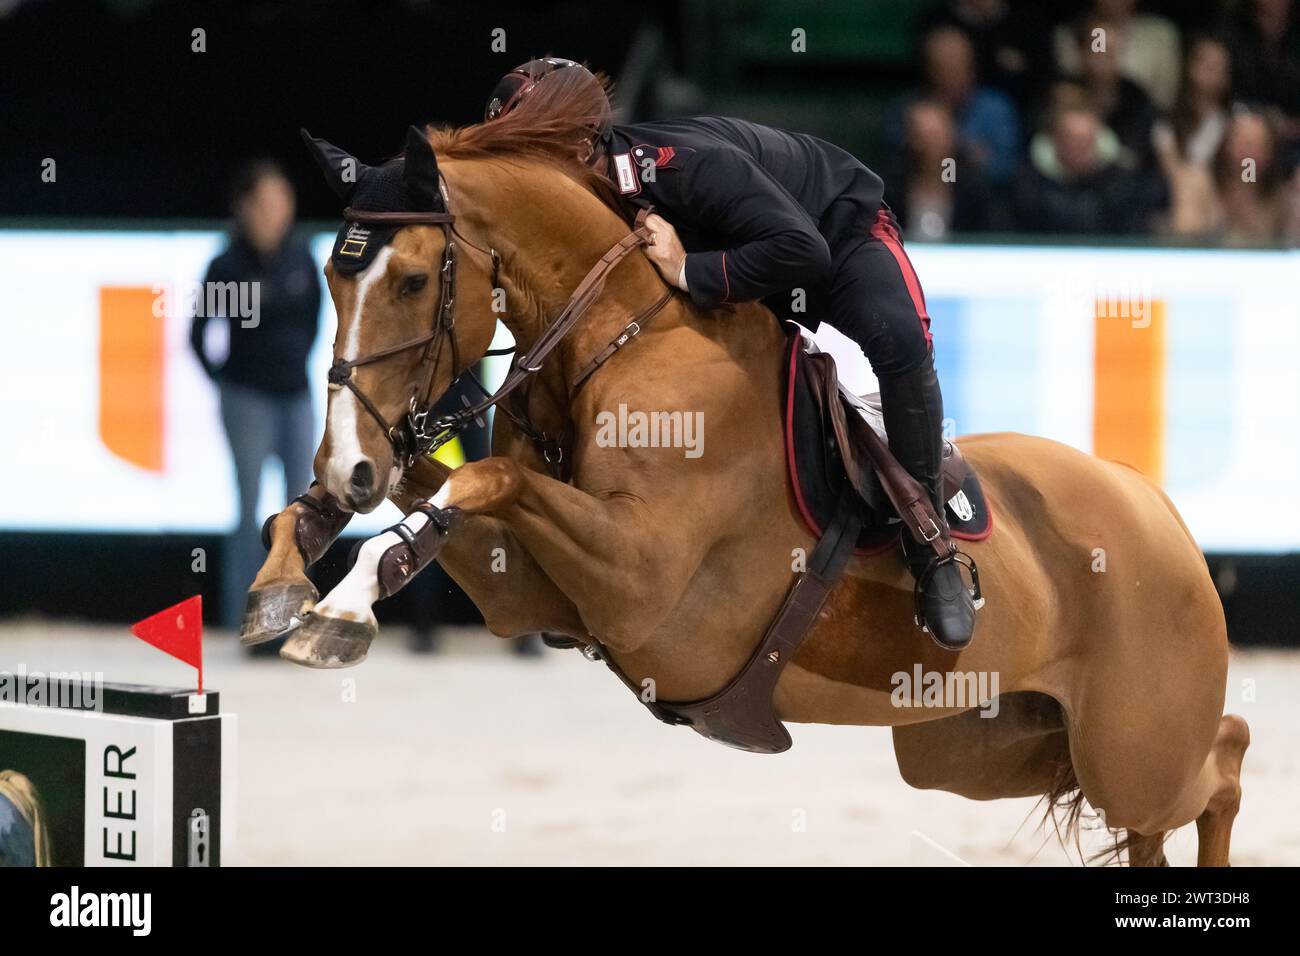 Denbosch, Netherlands - March 10, 2024. Emanuele Gaudiano of Italy riding Chalou competes in the 1.60m Rolex Grand Prix at the 2024 Rolex Dutch Master Stock Photo